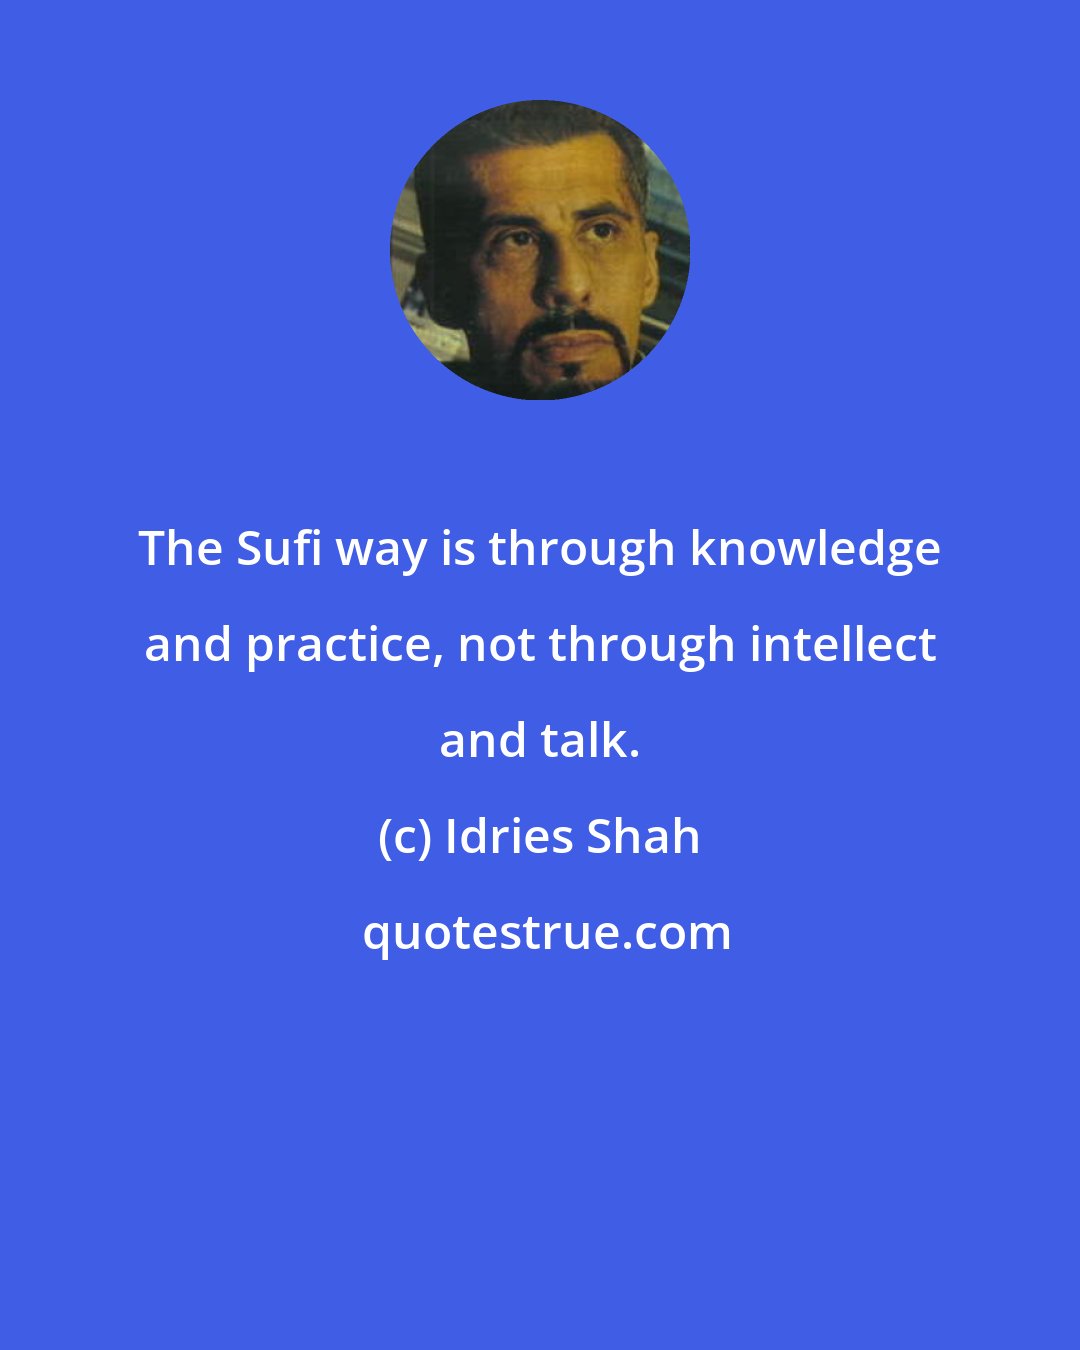 Idries Shah: The Sufi way is through knowledge and practice, not through intellect and talk.